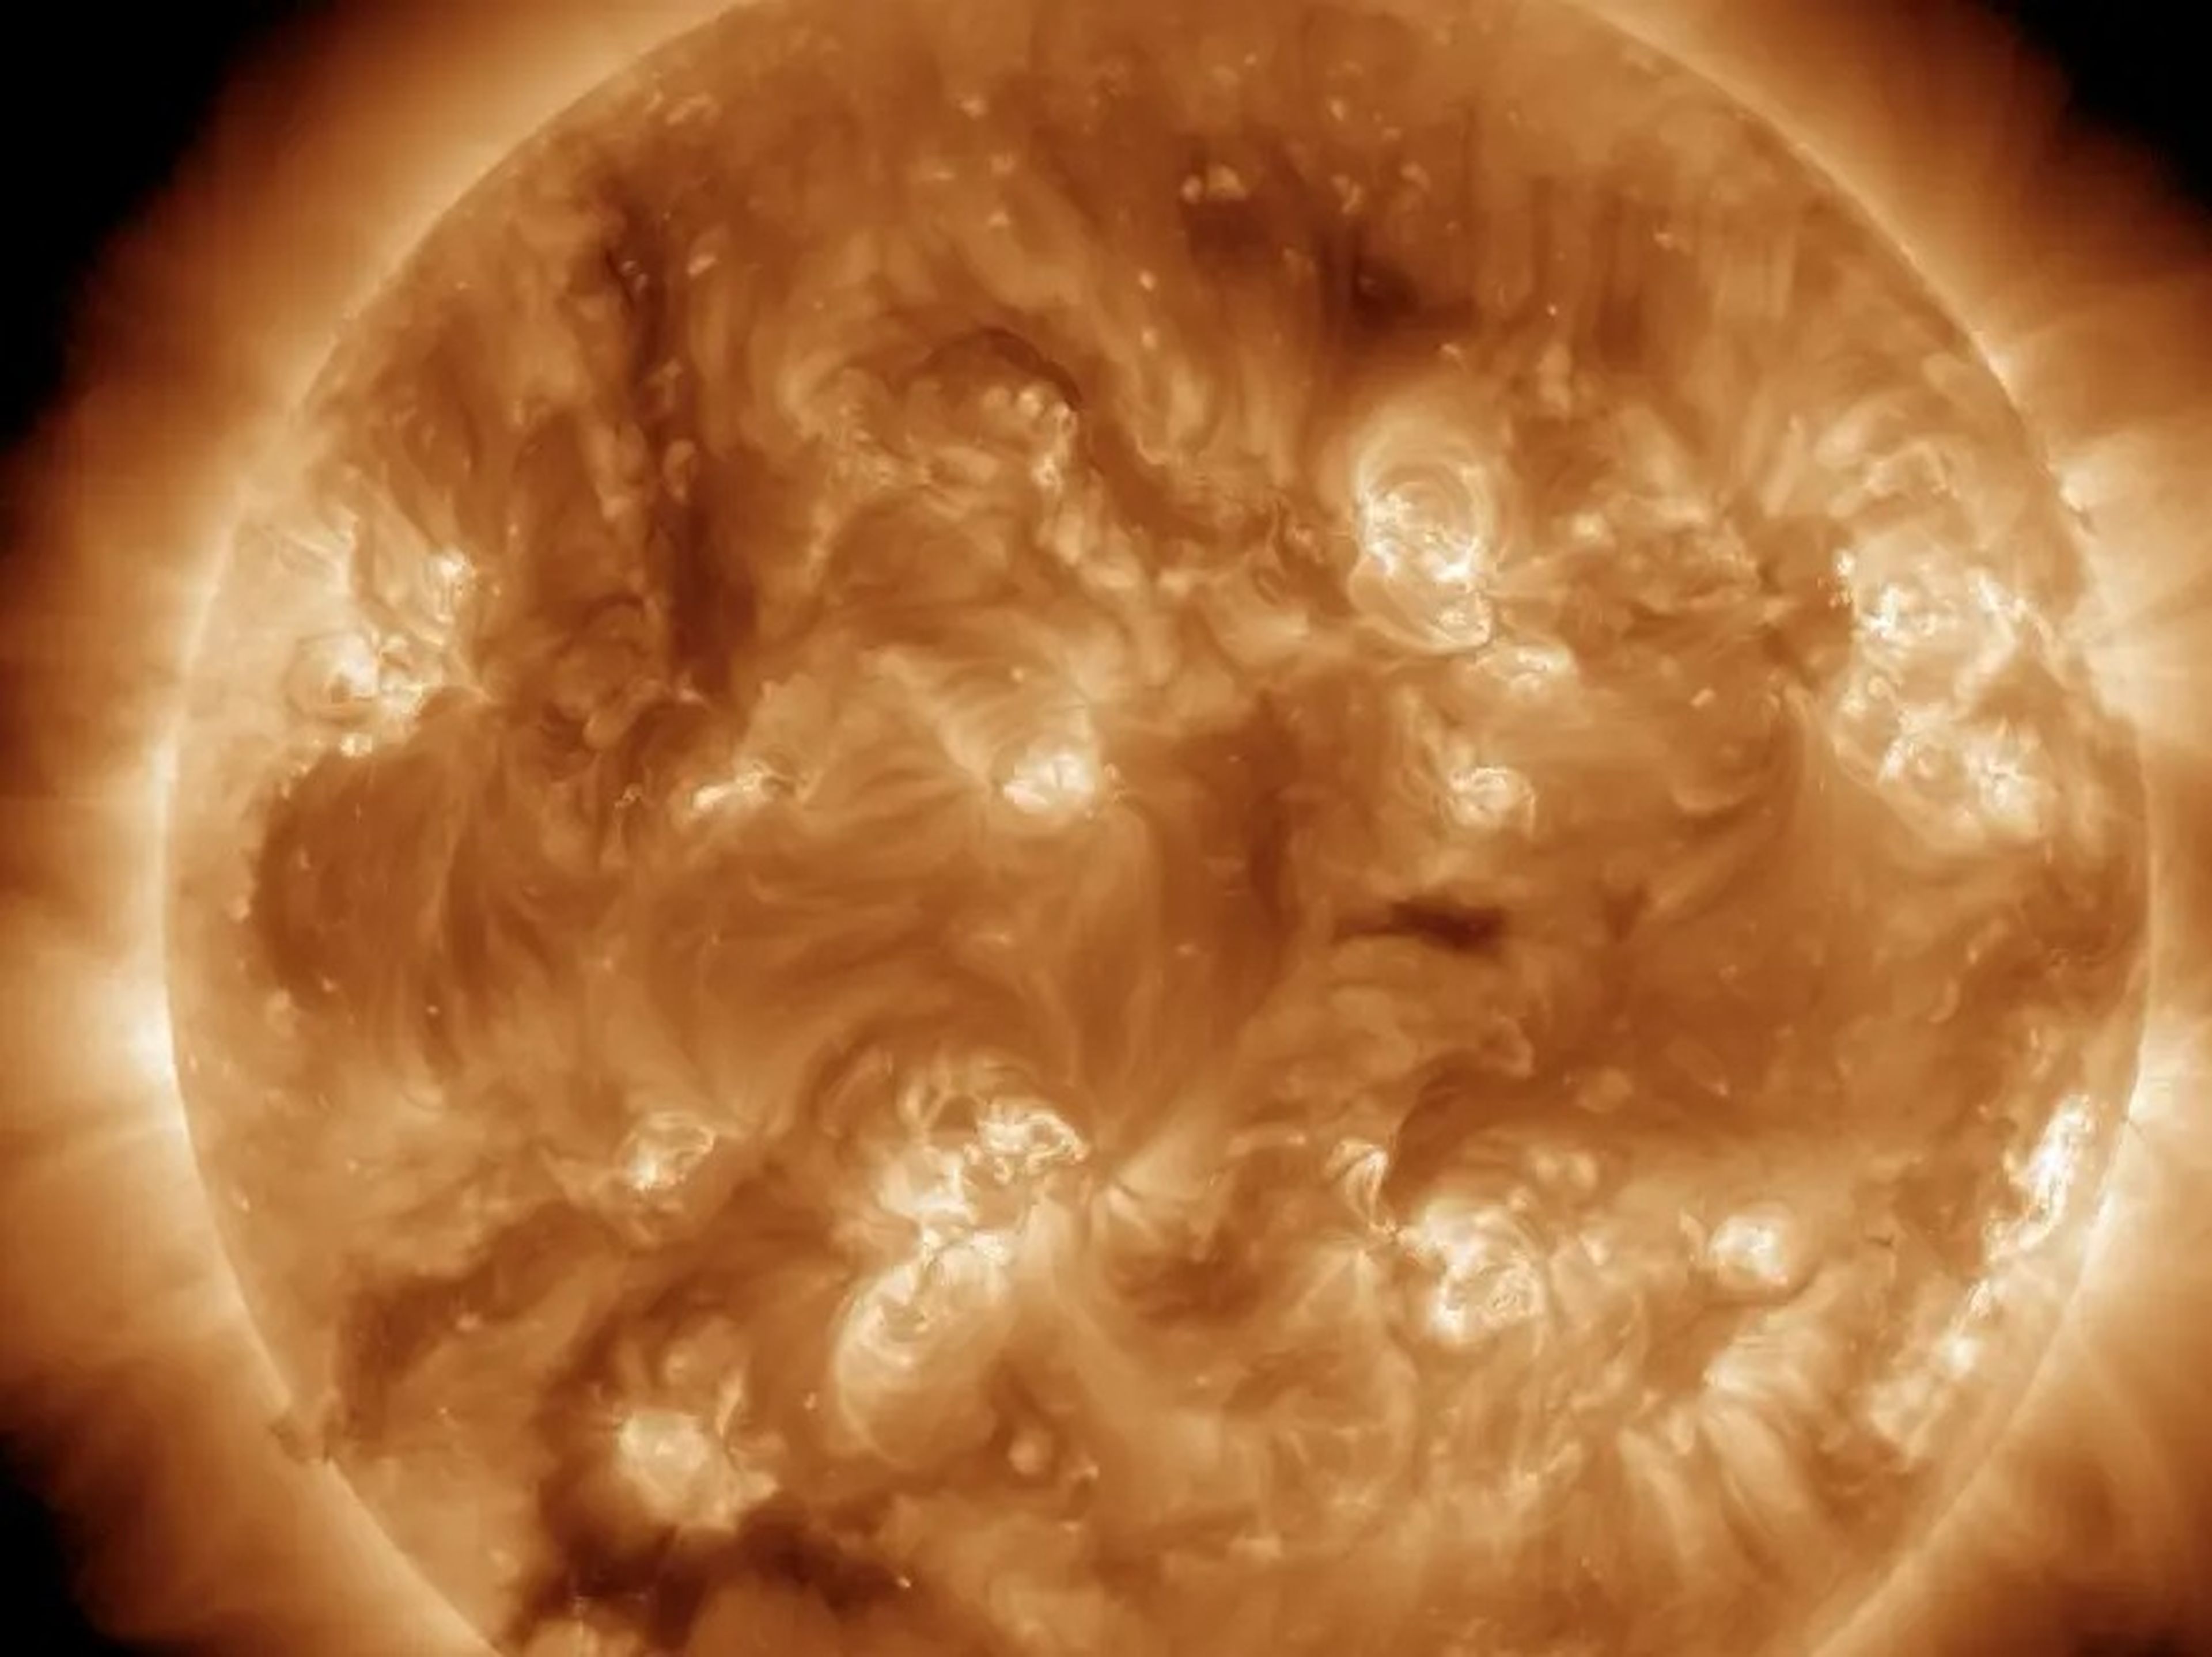 A picture of the sun shows the magnetic turbulence at this surface. Plasma is seen flowing from one sunspot to the next, showing the sun's activity level.